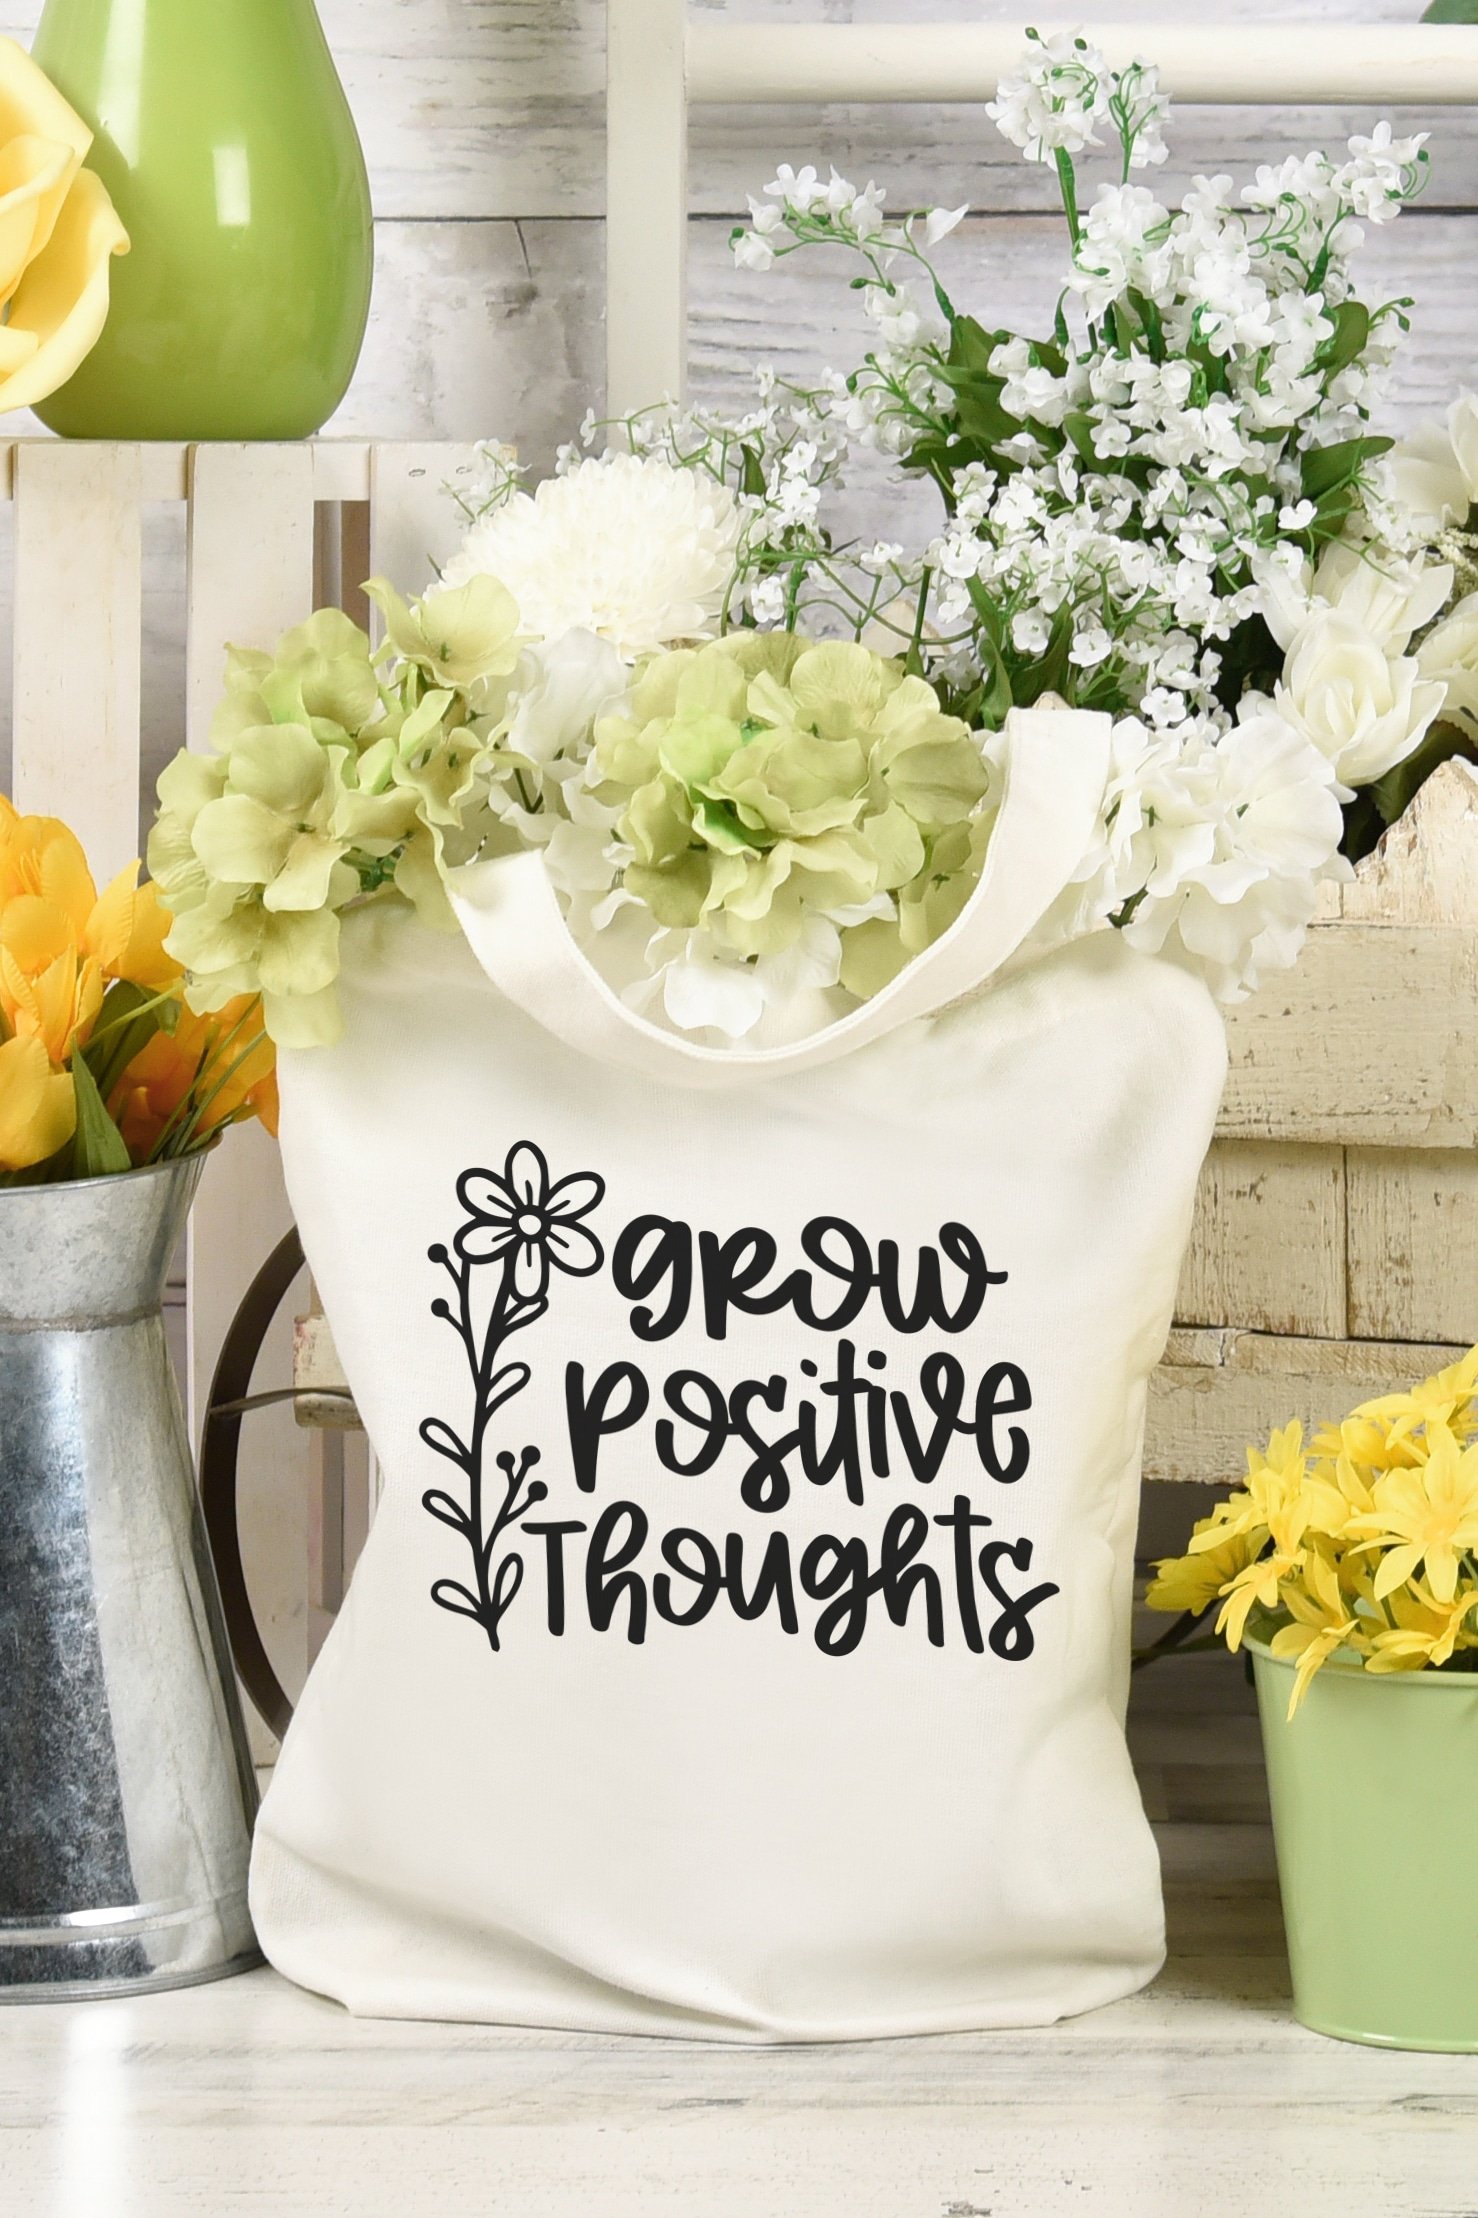 "Grow Positive Thoughts" Tote bag surrounded by white and yellow flowers